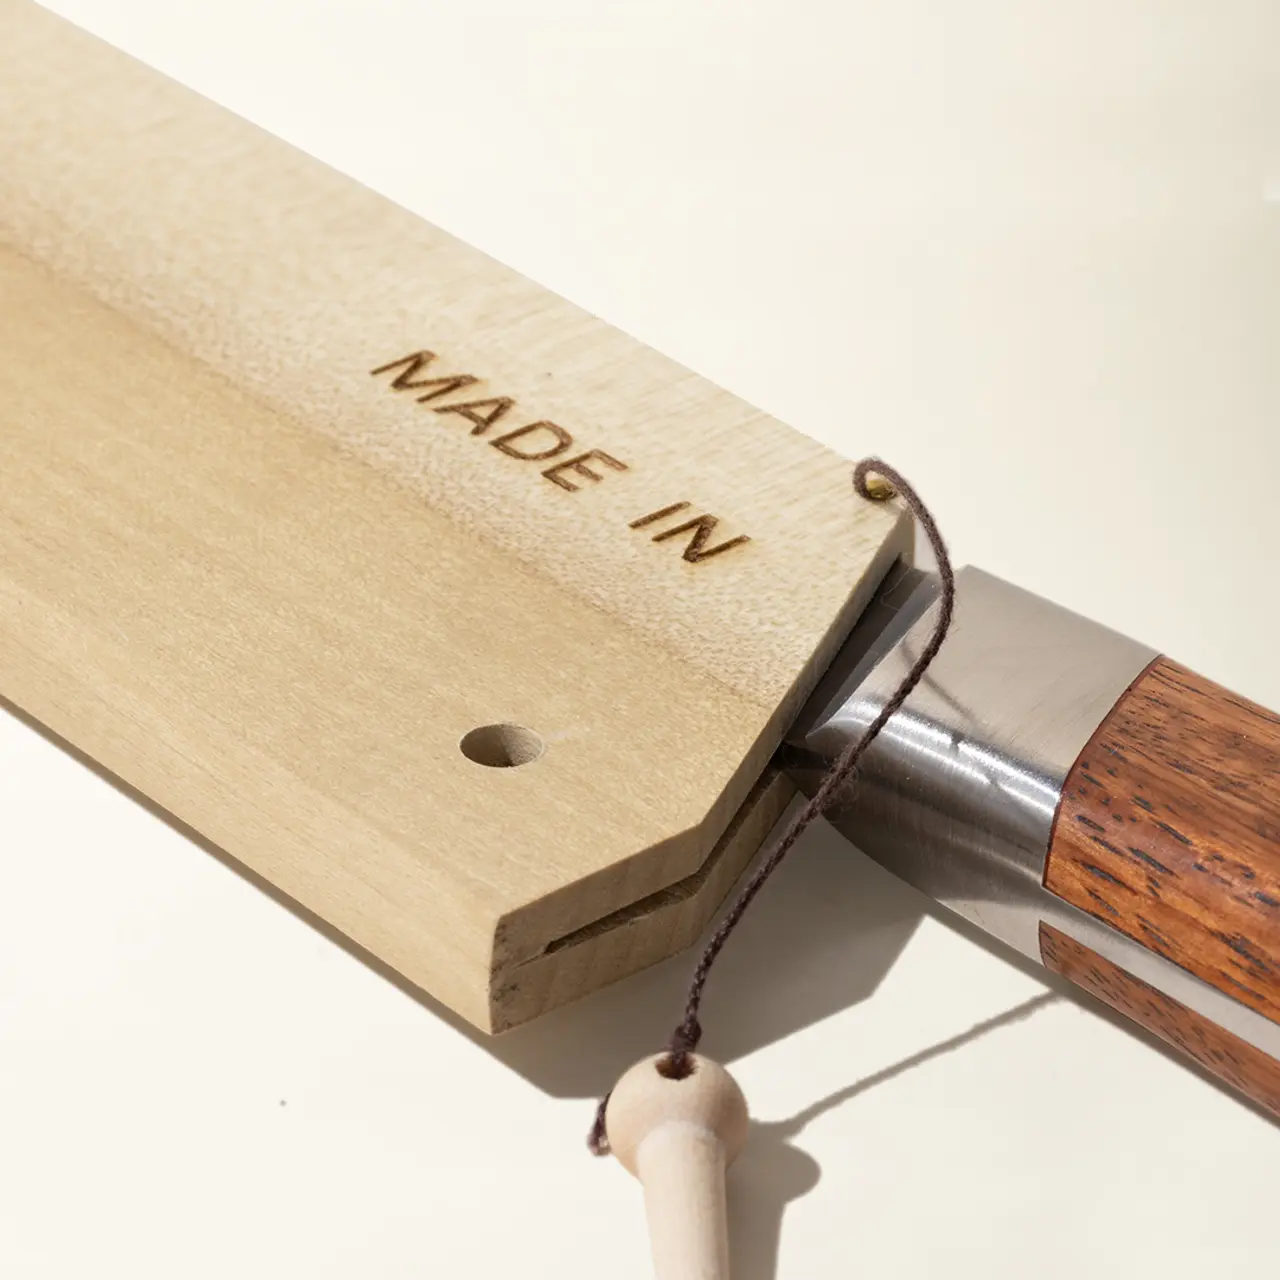 A close-up of a knife with "MADE IN" stamped on light wood, highlighting the blade and wooden handle with a cord through a hole at the end of the handle.